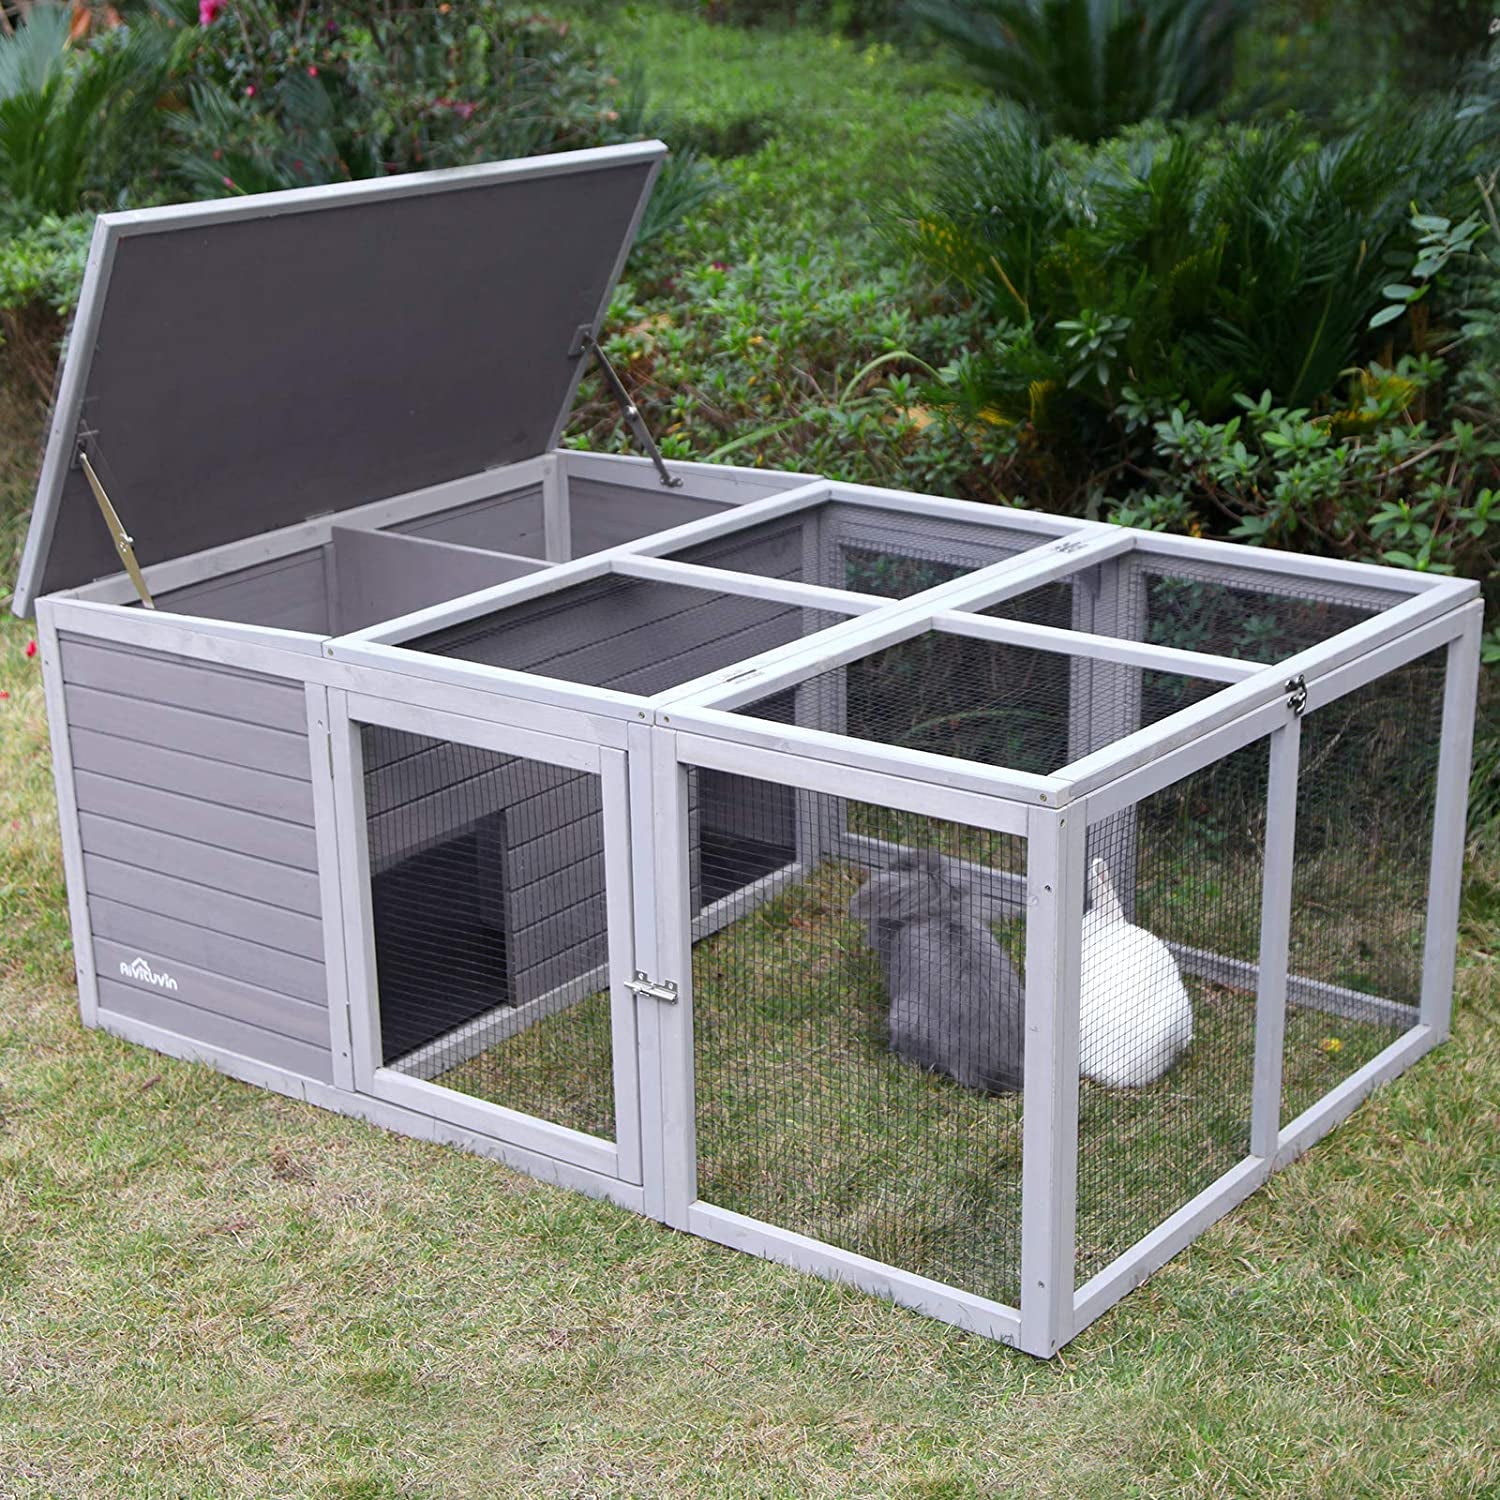 Rabbit Hutch Outdoor Large, Bunny Cage Indoor for 2 Rabbits, Poultry Playpen Duck Cage Playpen for Small Animals with Easy to Clean PVC Layer